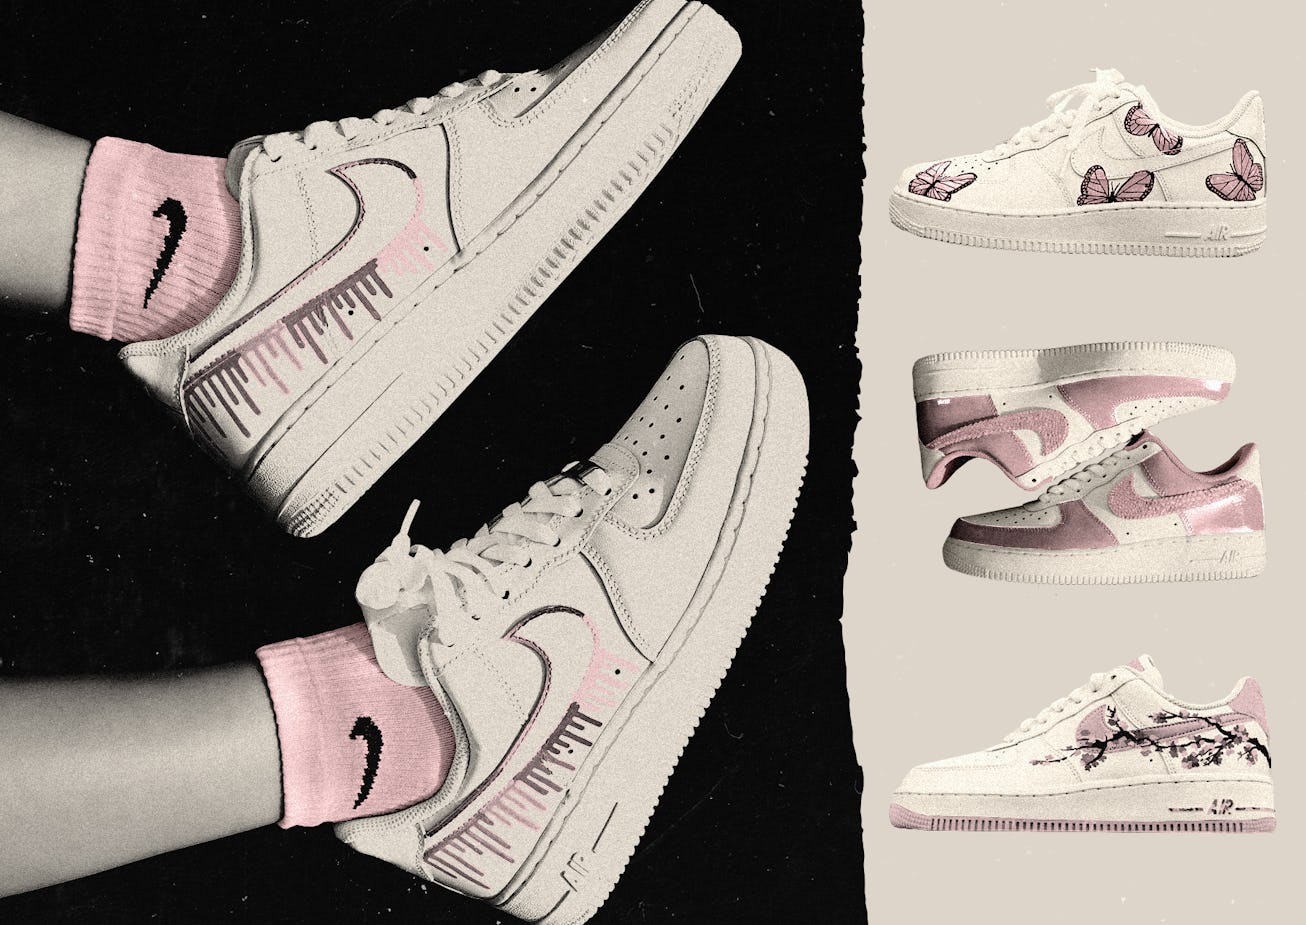 White Nike Air Force 1 sneakers